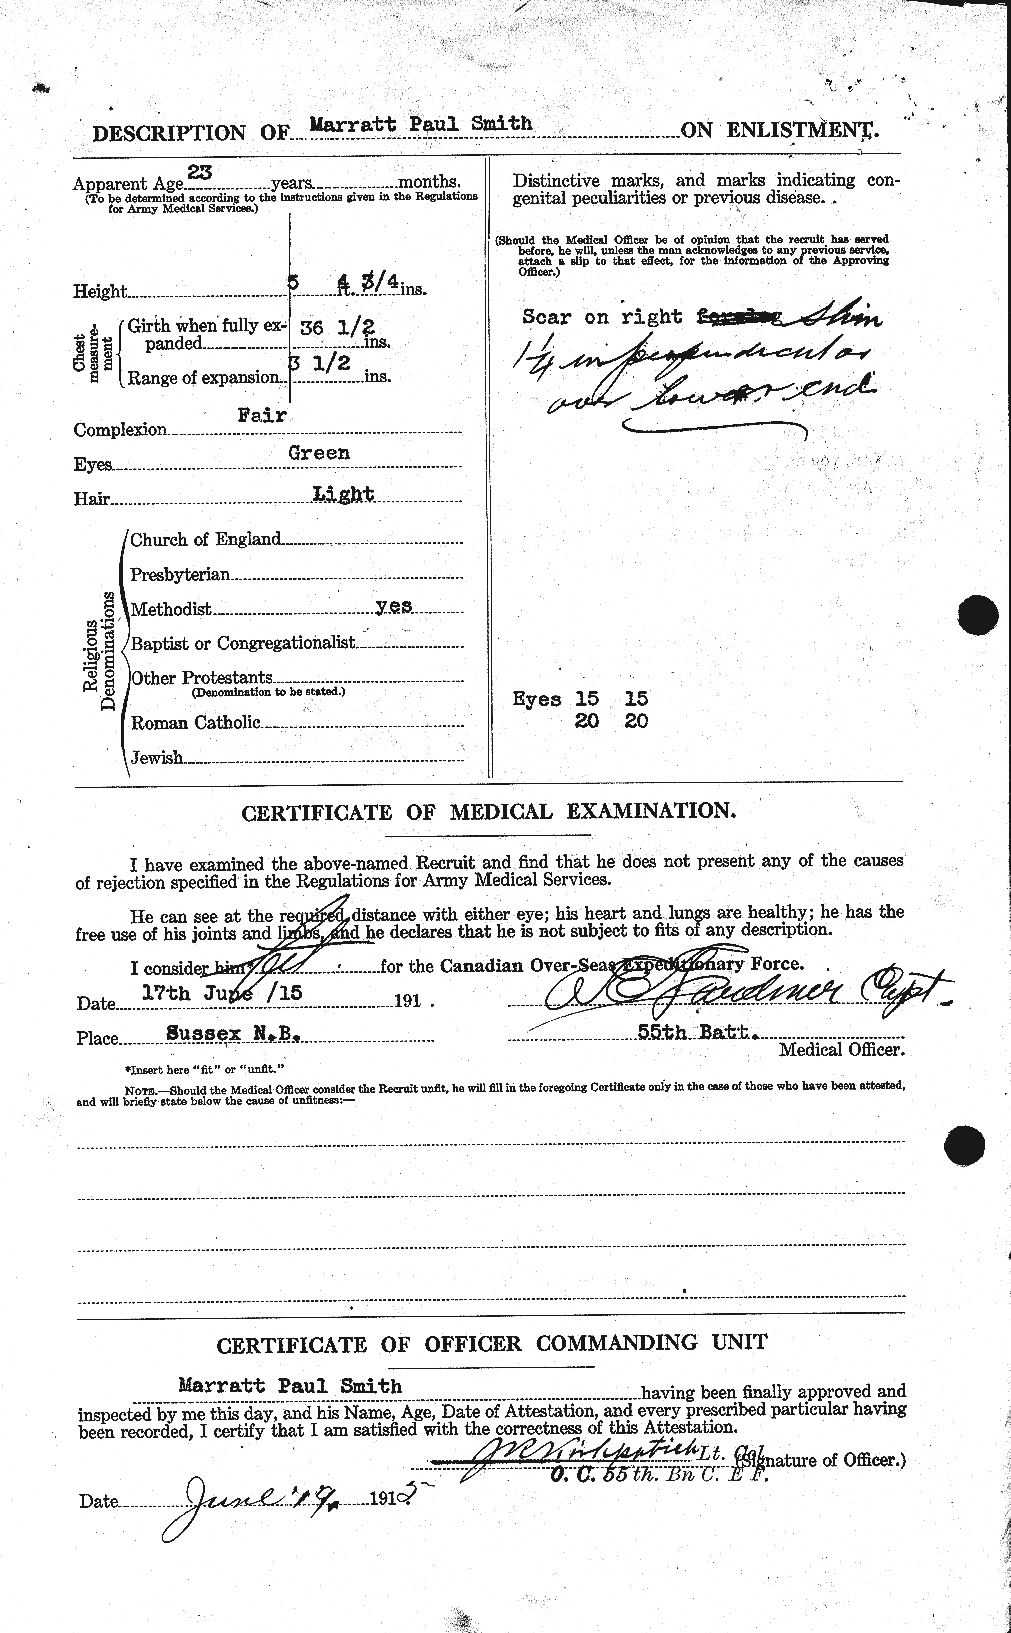 Personnel Records of the First World War - CEF 104780b